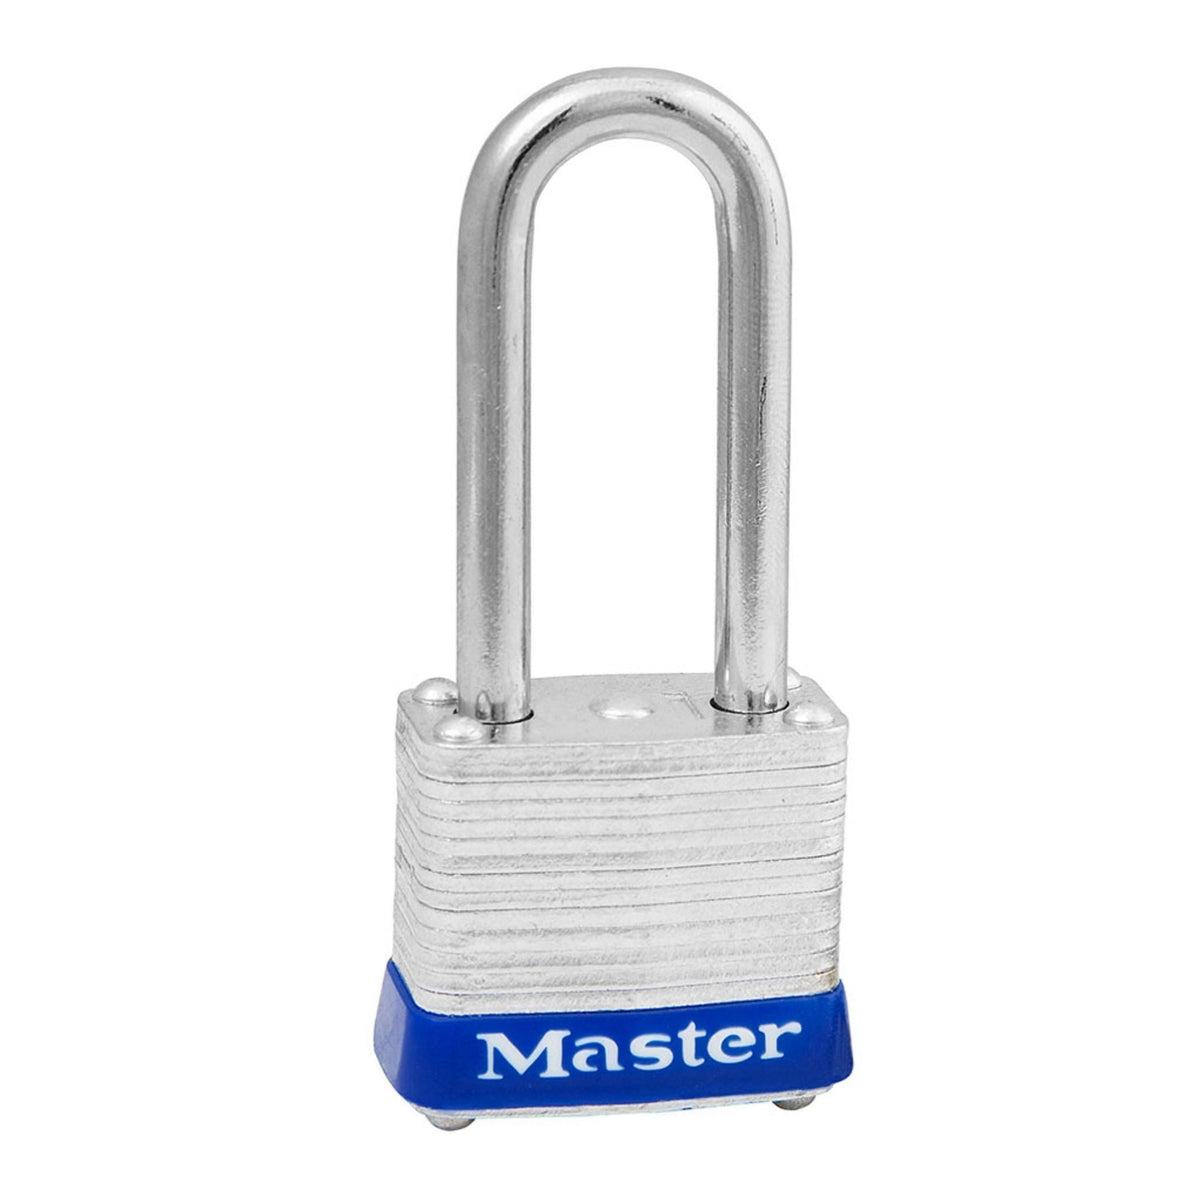 Master Lock 7KALF-P156 Pre-Keyed Lock Matched to Existing Key Number P156 with 1-Inch Shackle - The Lock Source